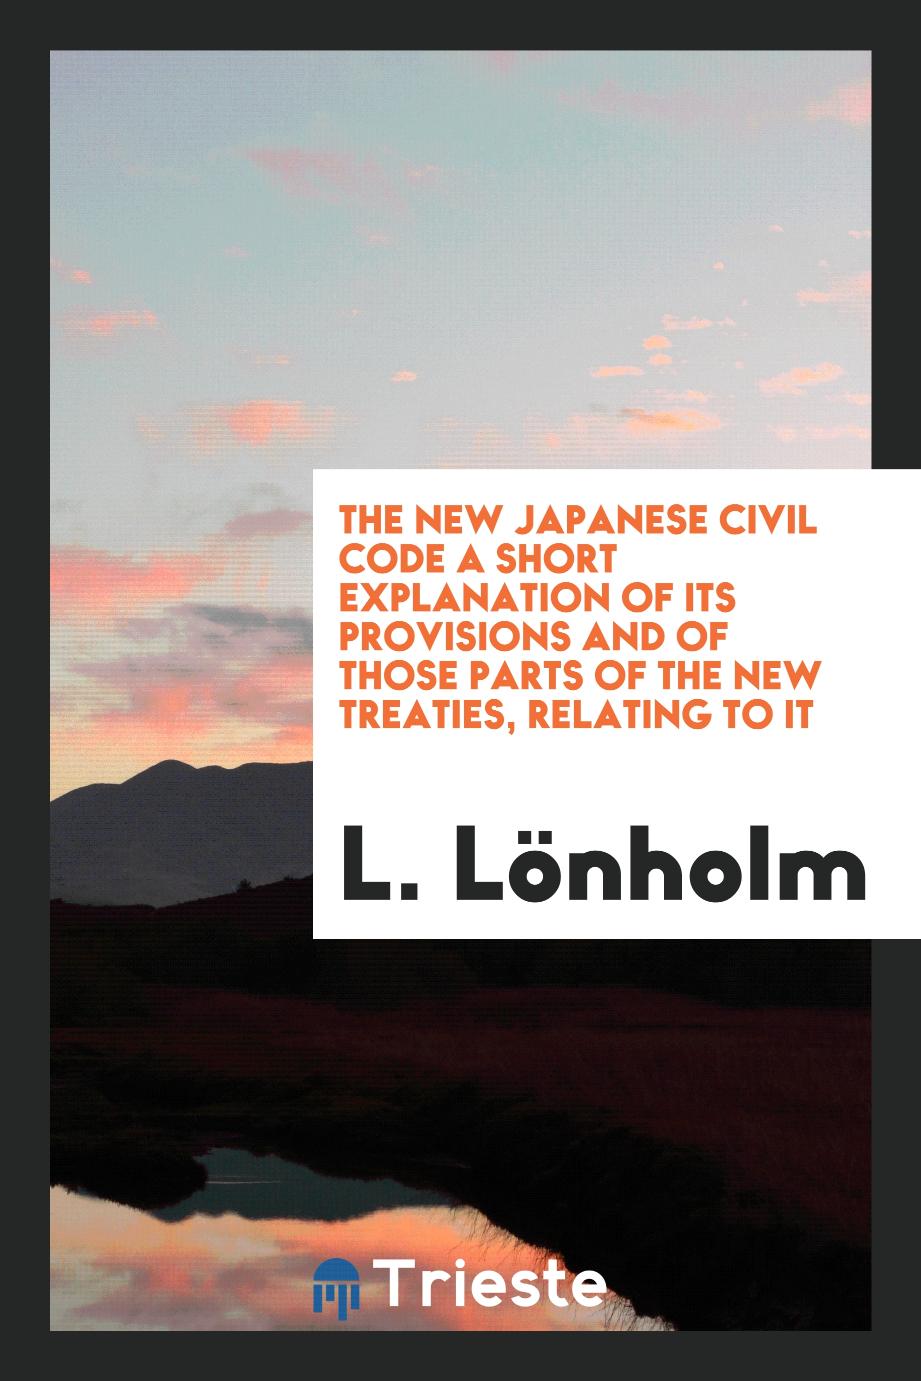 The New Japanese Civil Code A Short Explanation of Its Provisions and of Those Parts of the New Treaties, Relating to It